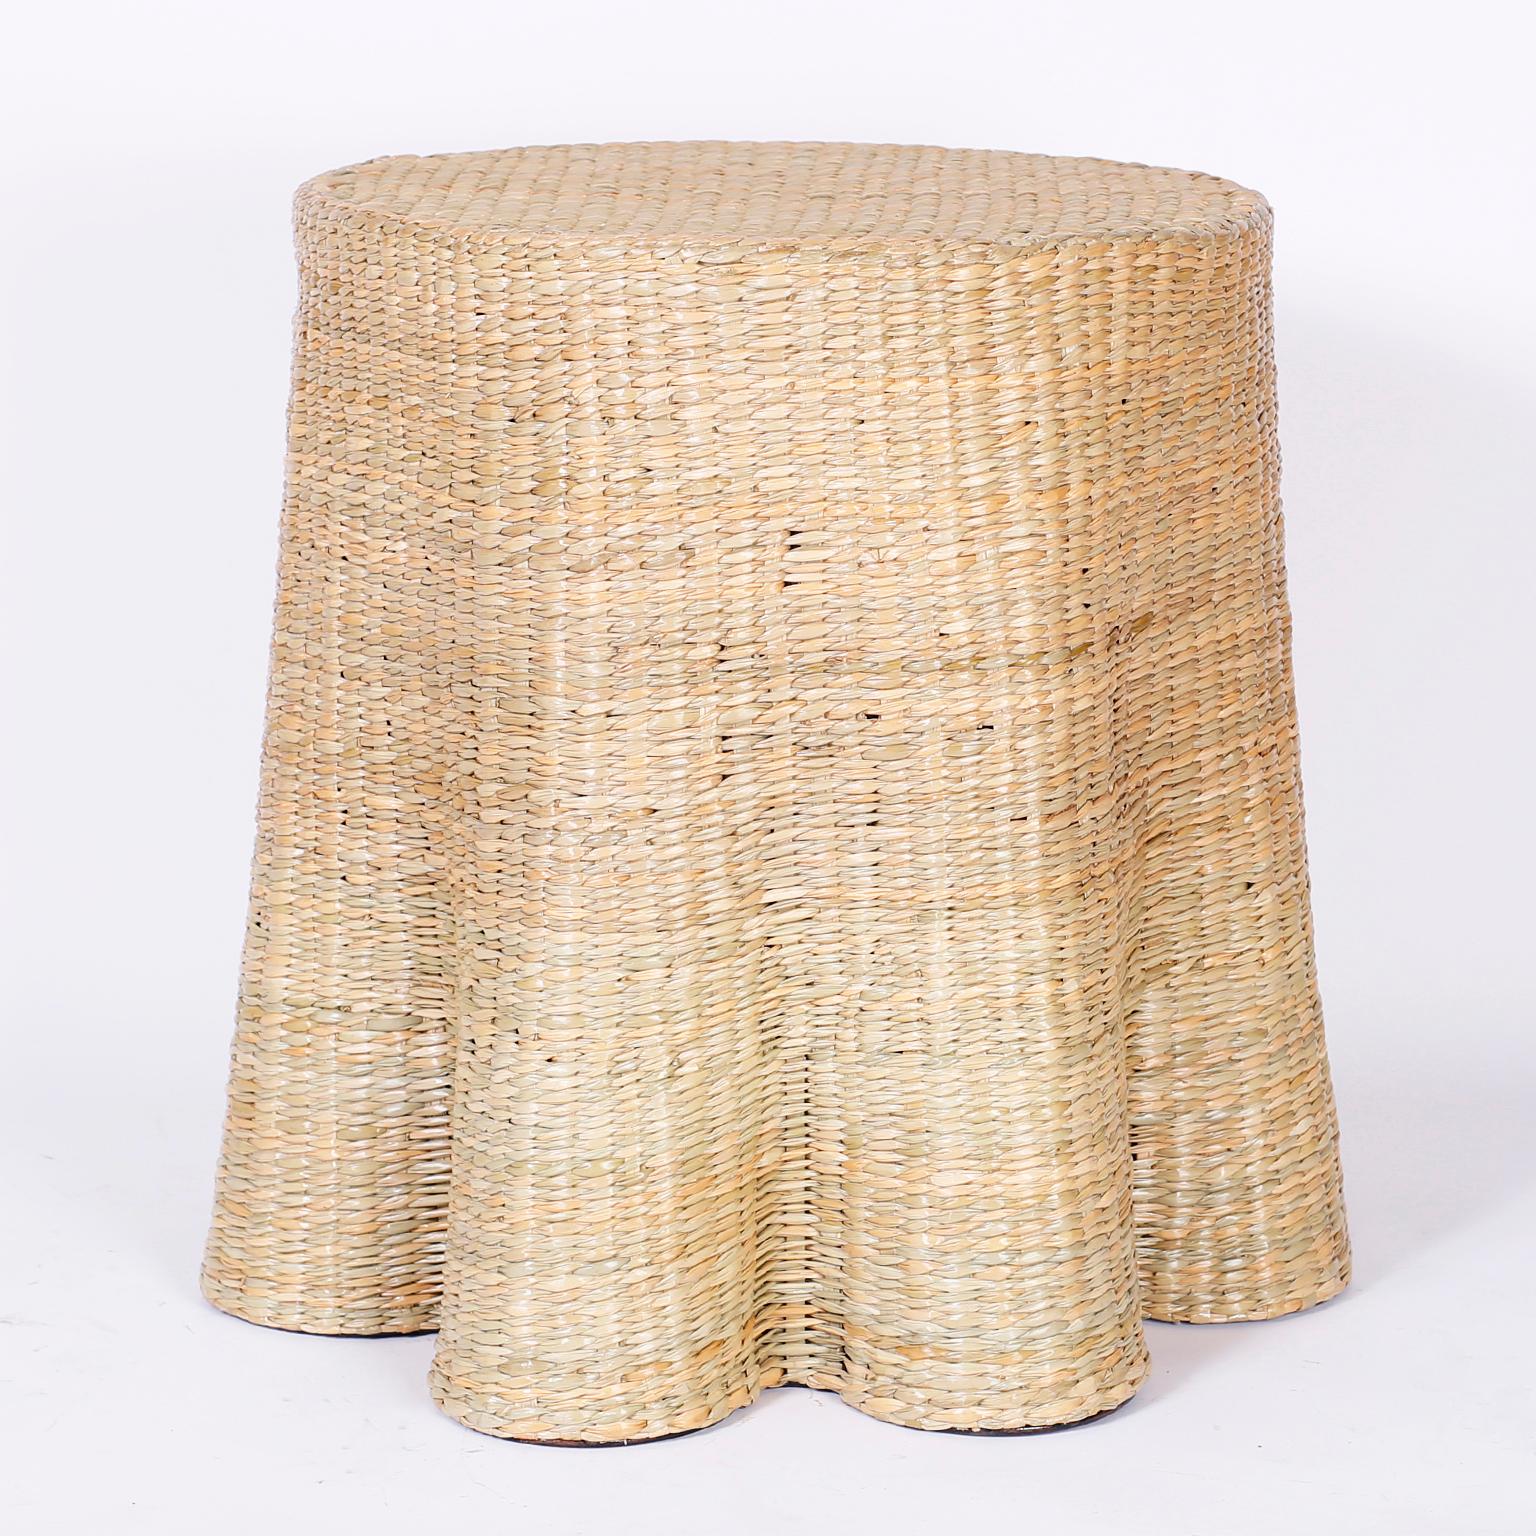 Chic pair of handmade wicker drapery ghost stands crafted in woven reed over a sturdy metal frame with the highest quality and perfect proportions from the FS Flores Collection, exclusively designed and sold by F. S. Henemader Antiques.
